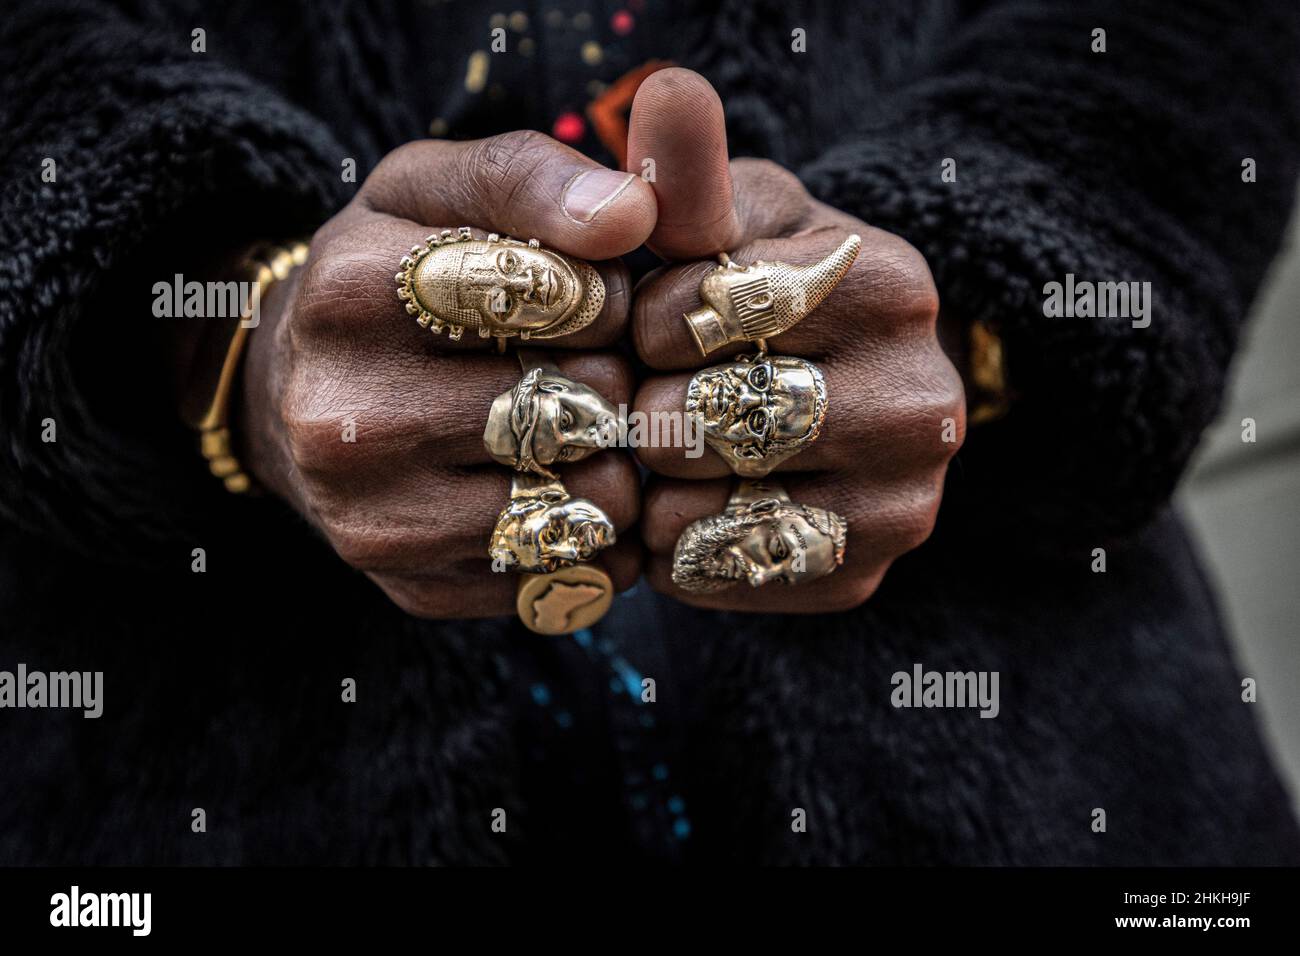 close up view of rings on hand male wearing multiple rings Stock Photo